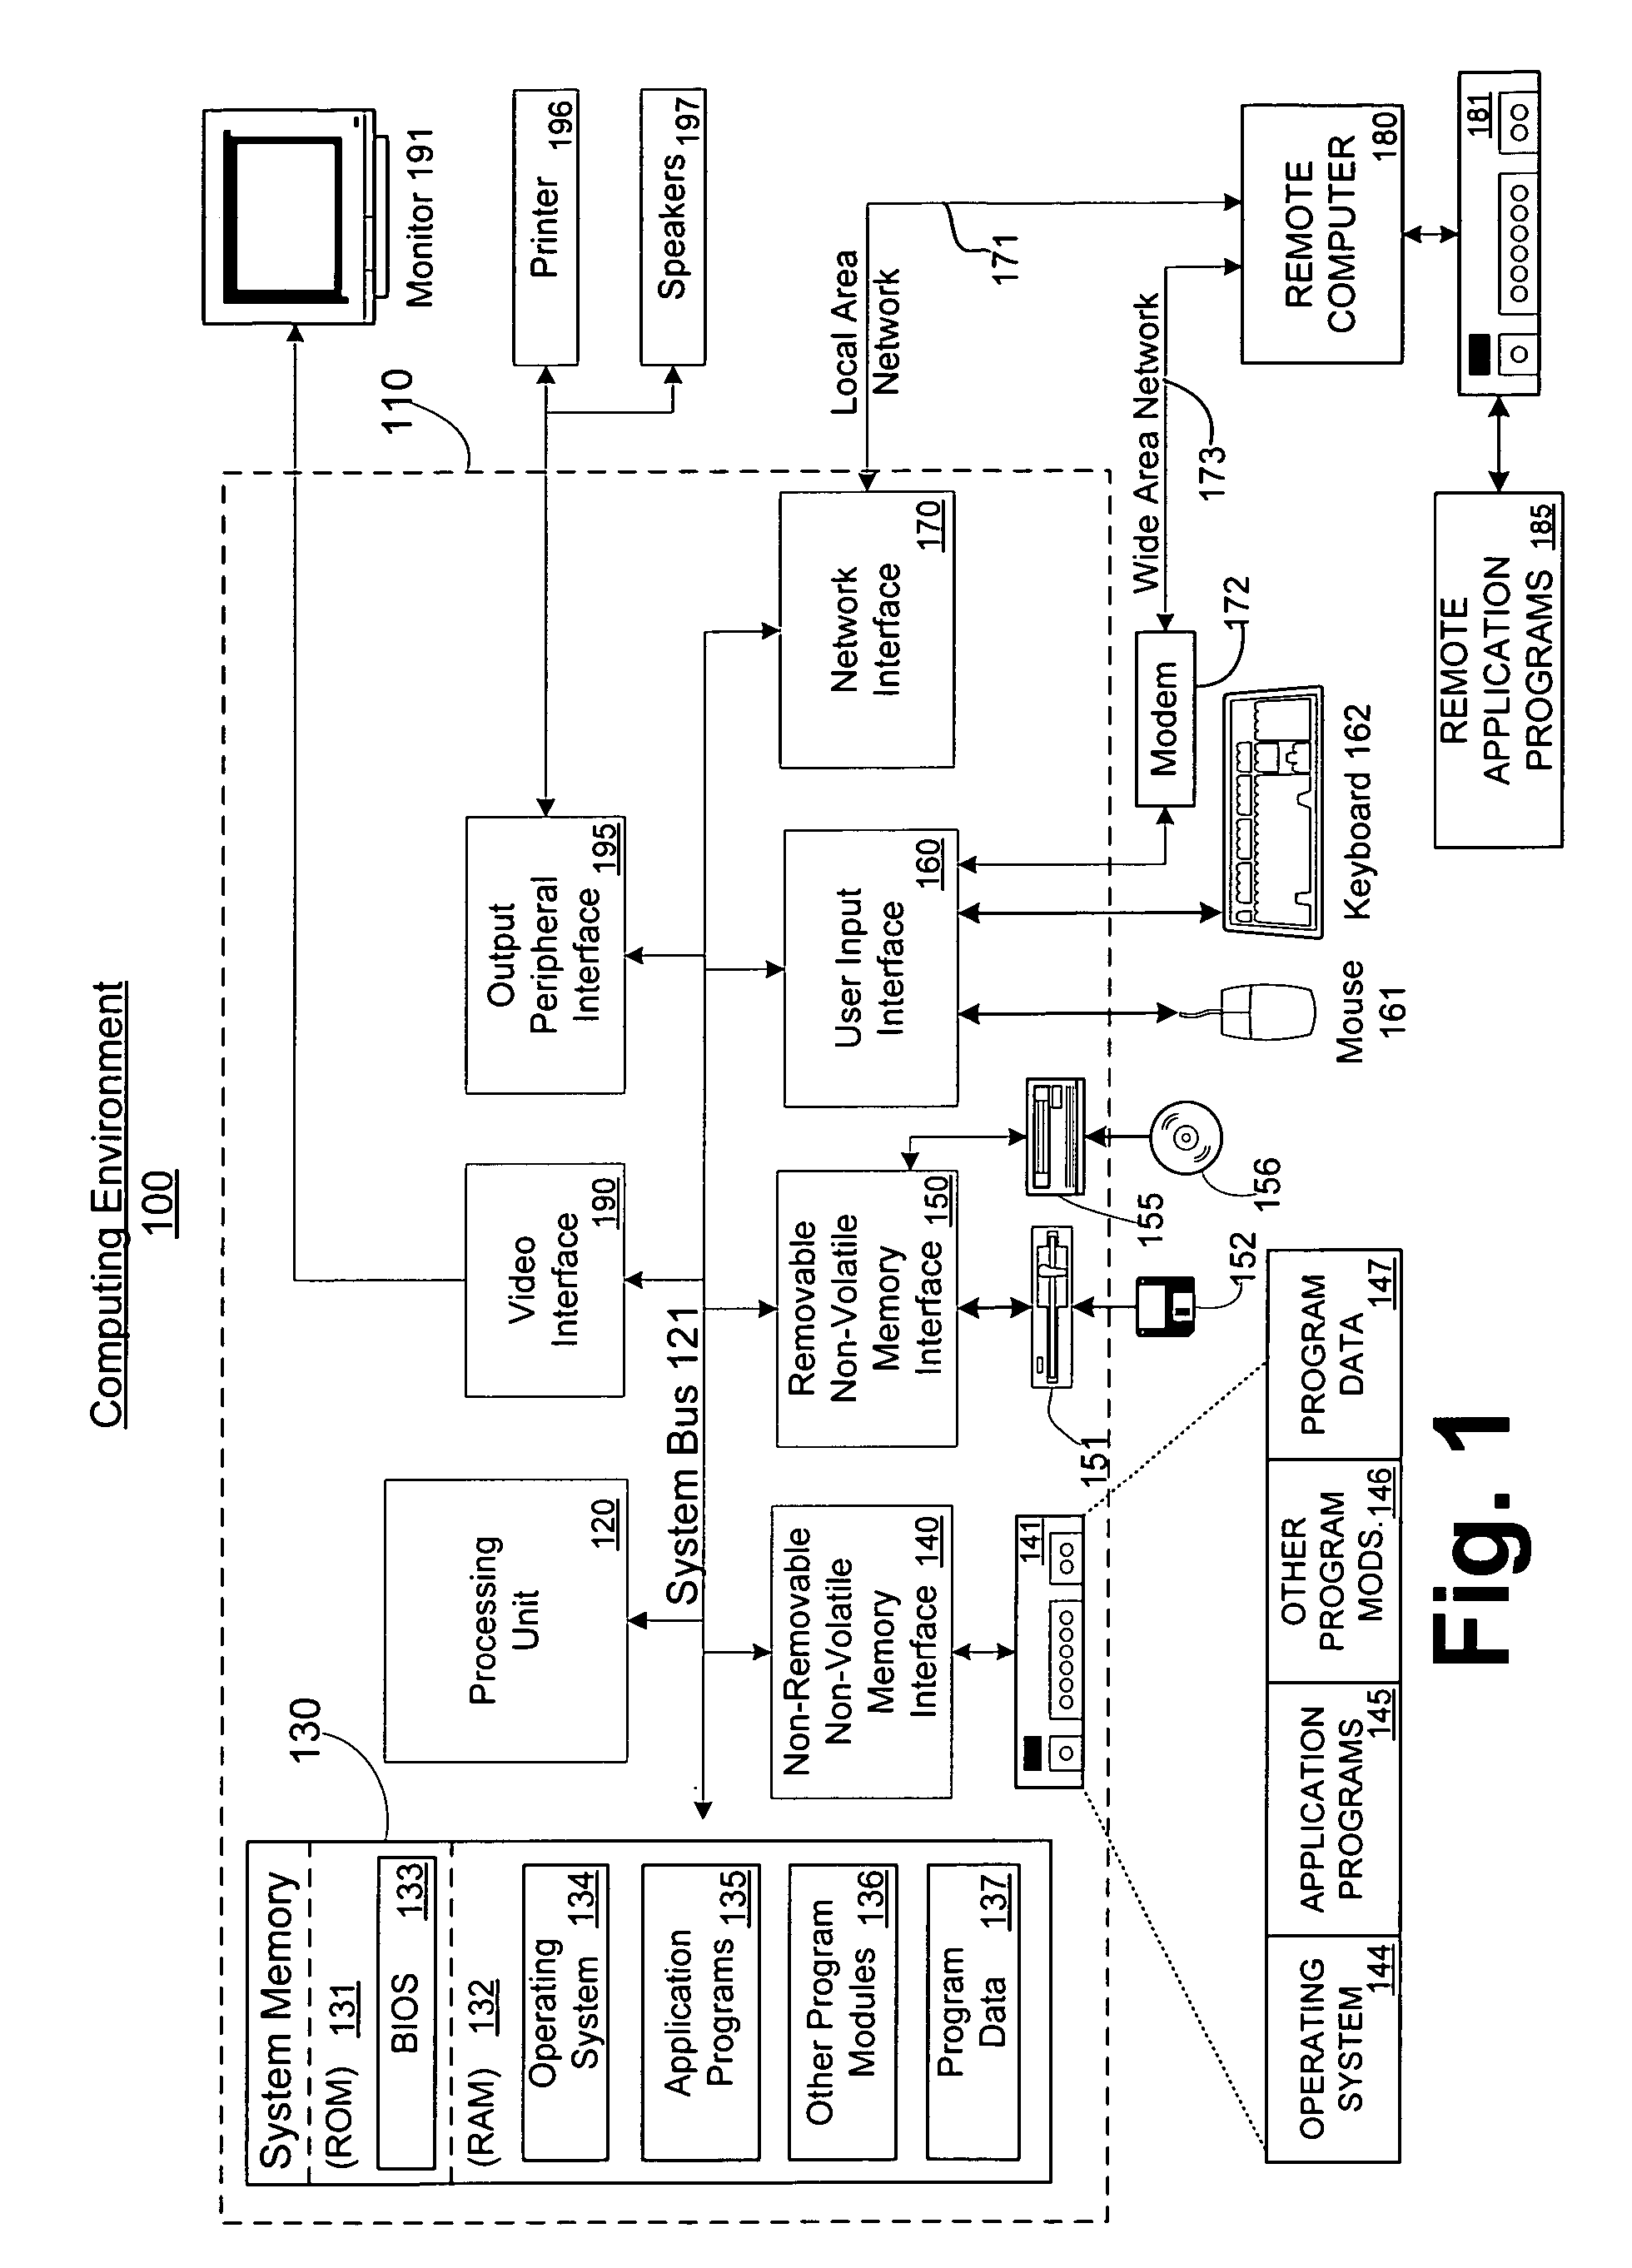 Data structure for identifying hardware and software licenses to distribute with a complying device